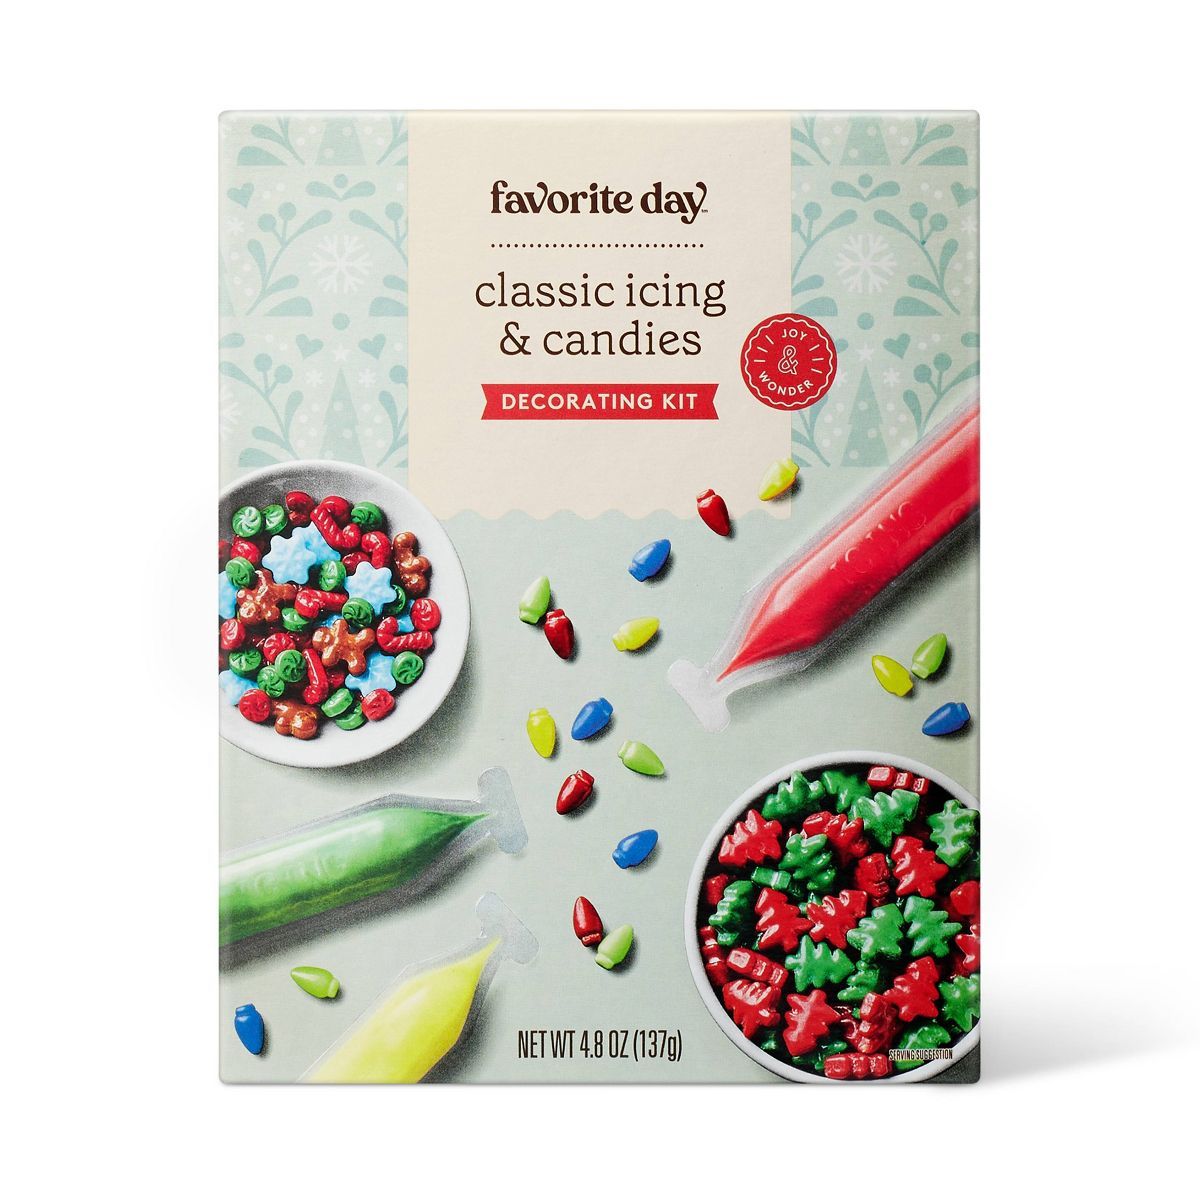 Holiday Classic Icing & Candies Decorating Kit - 4.8oz - Favorite Day™ | Target